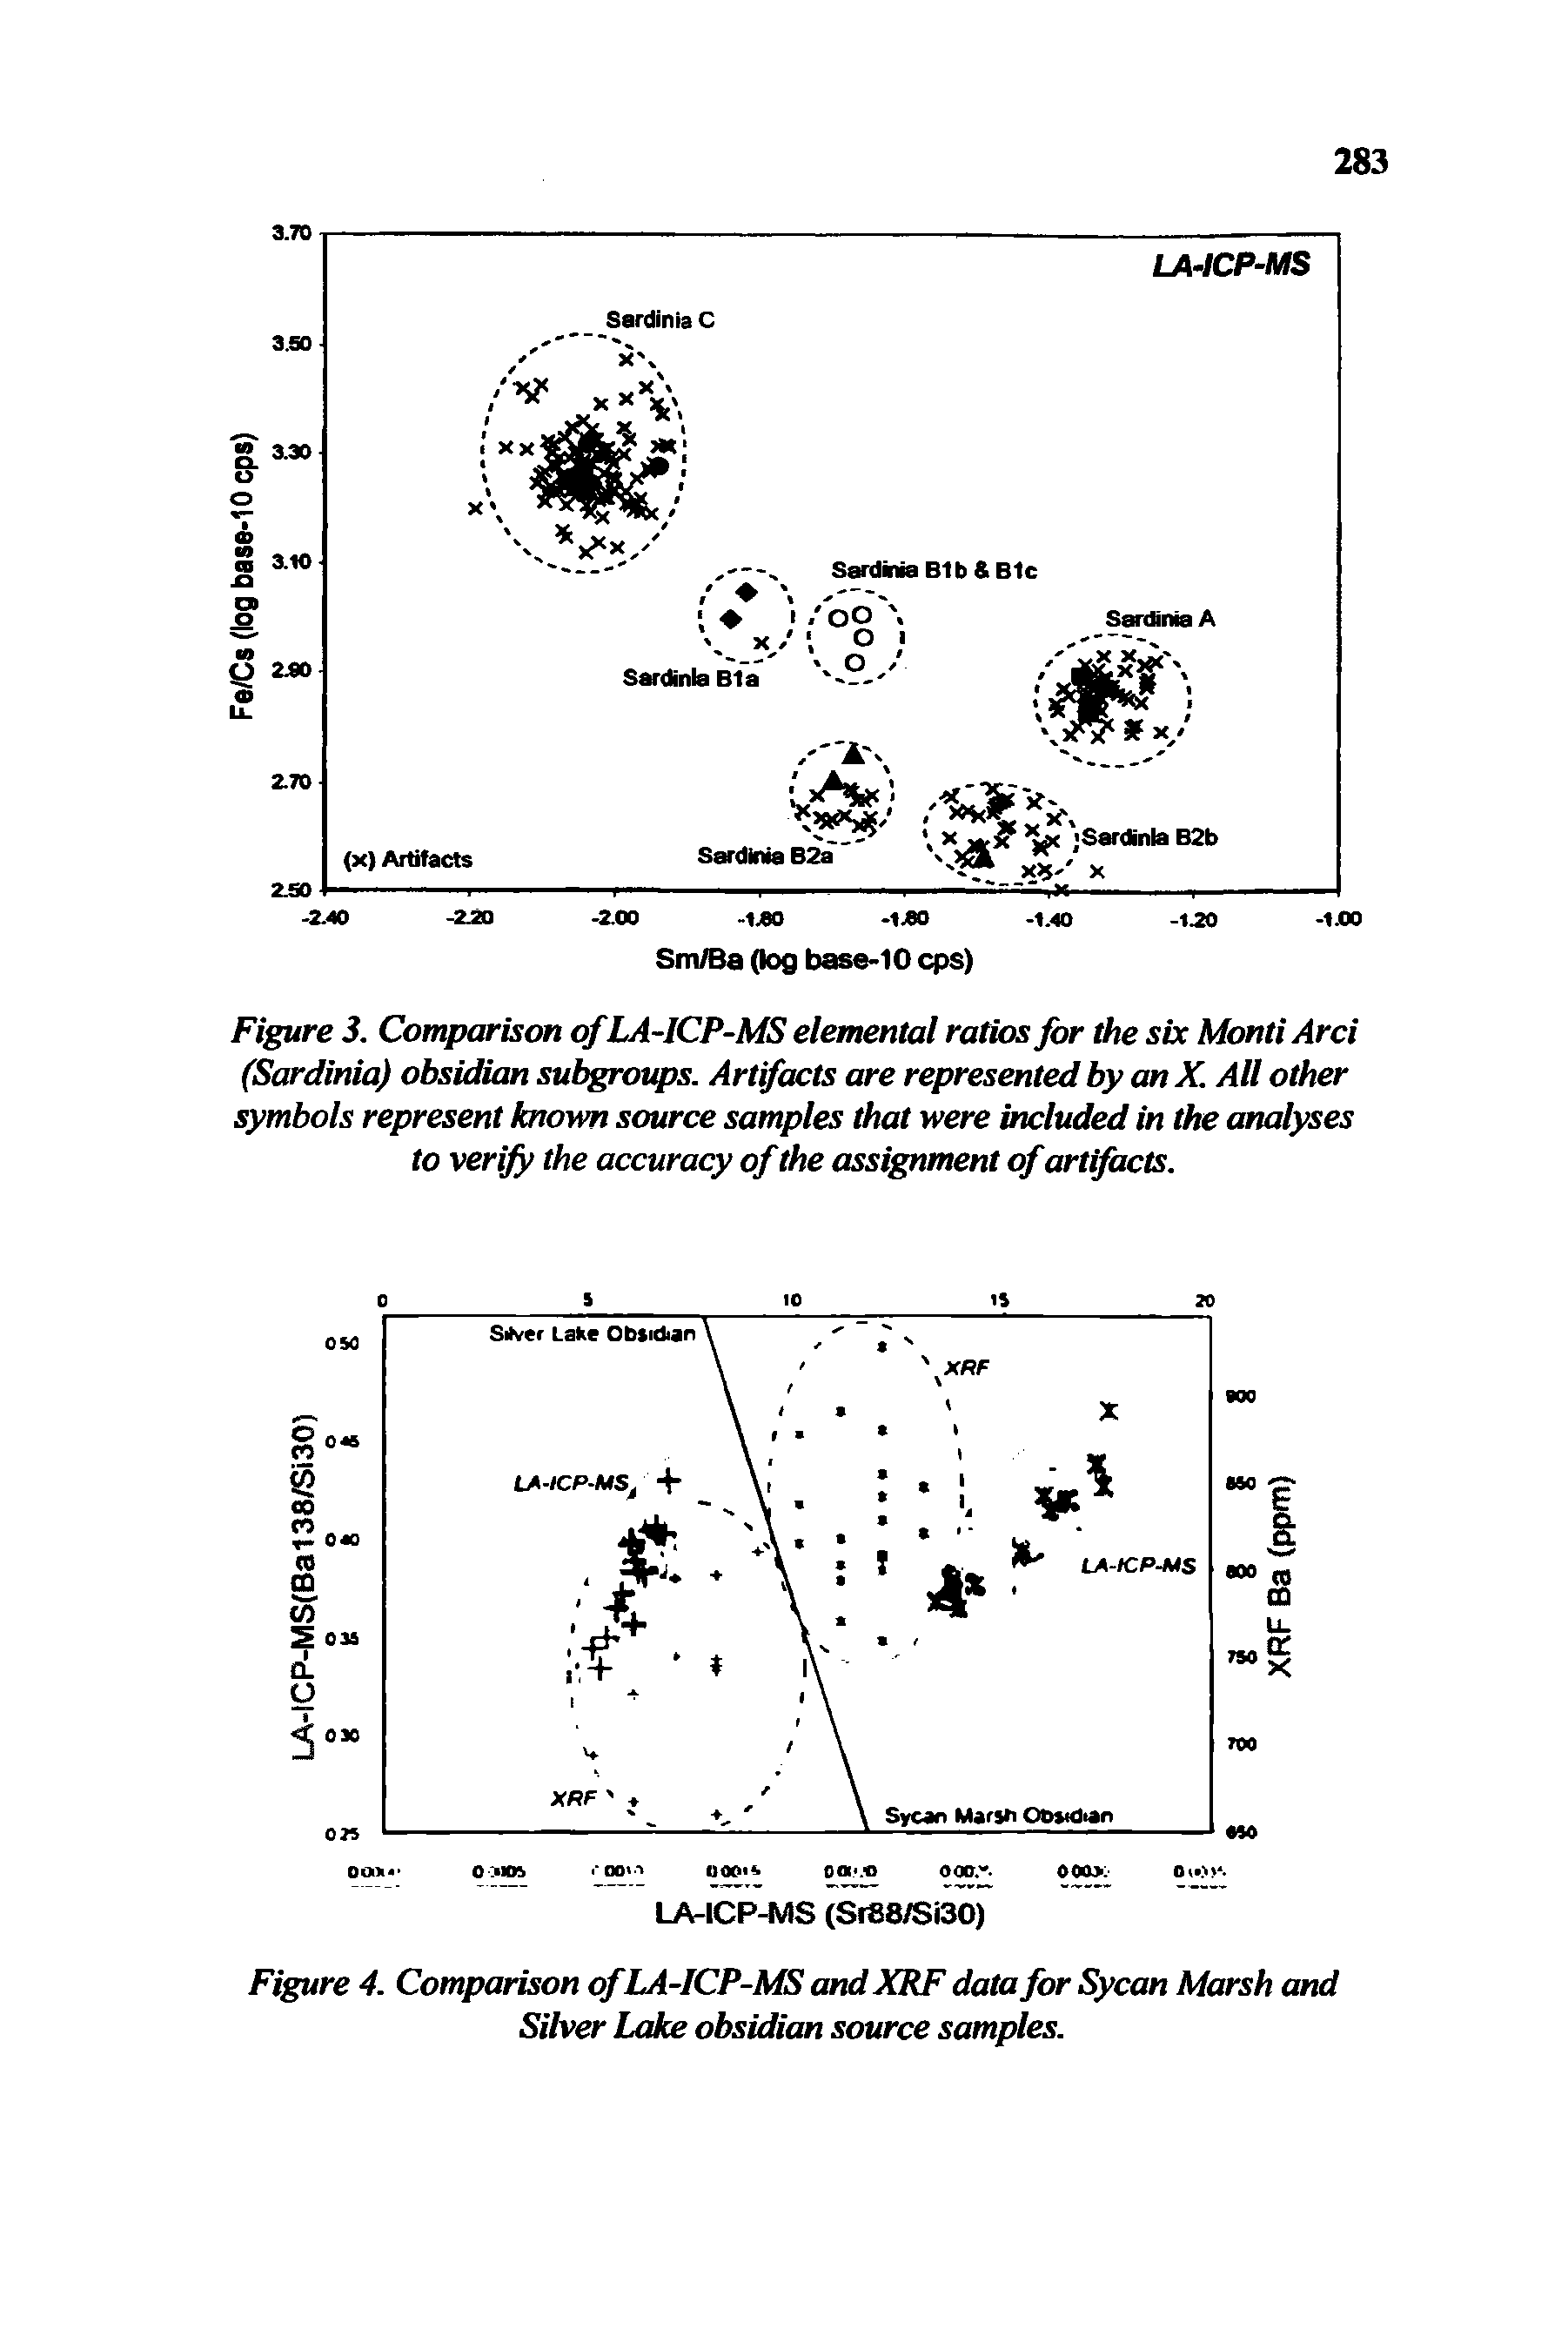 Figure 4. Comparison ofLA-ICP-MS and XRF data for Sycan Marsh and Silver Lake obsidian source samples.